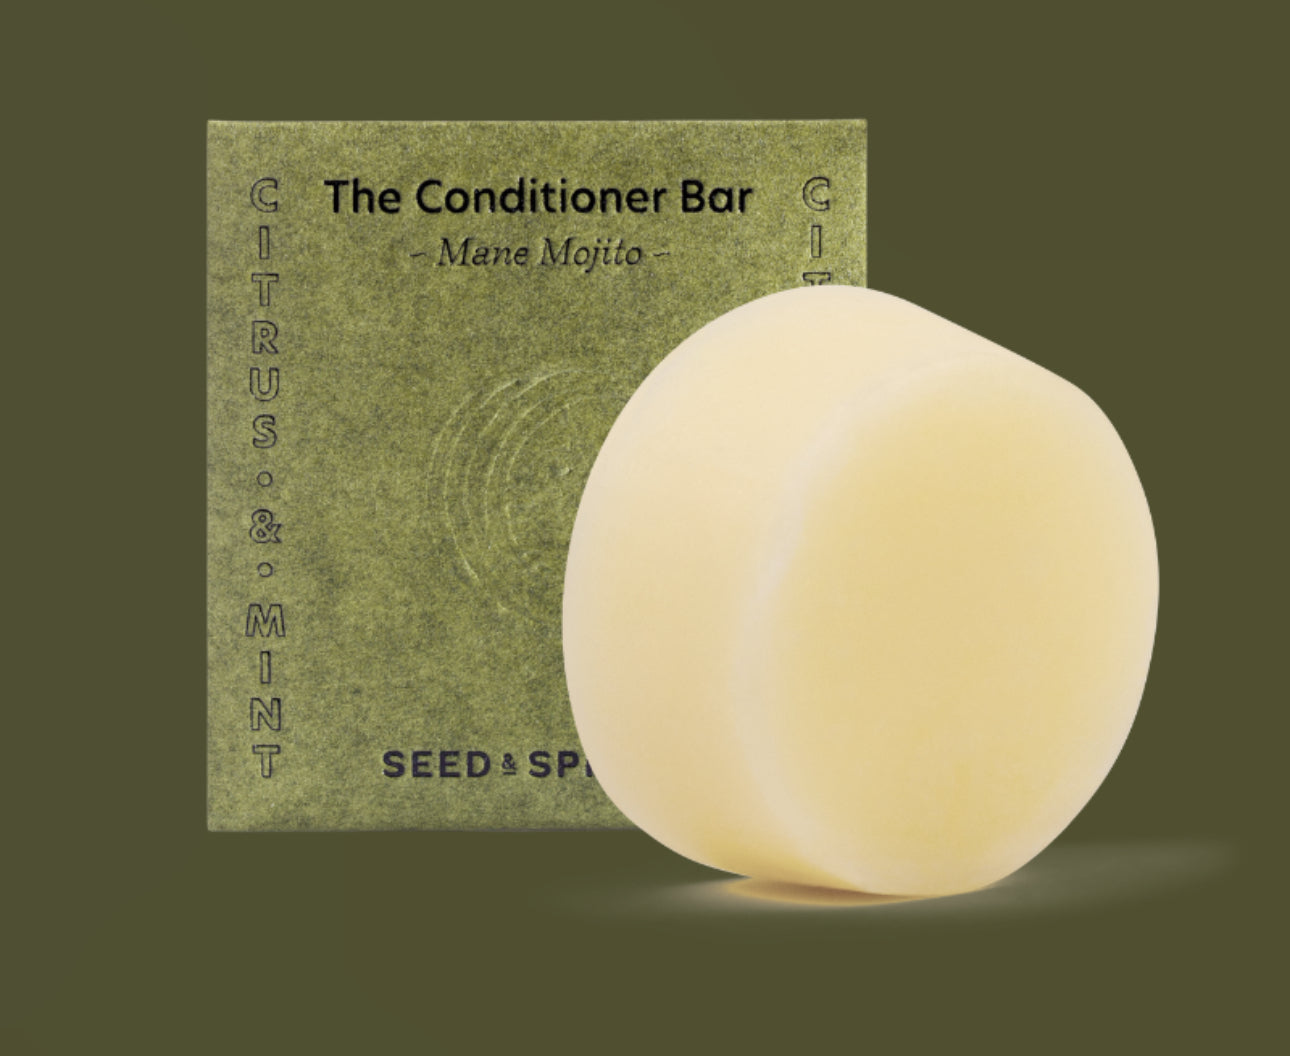 Seed & Sprout Conditioner Bar - Citrus and Mint